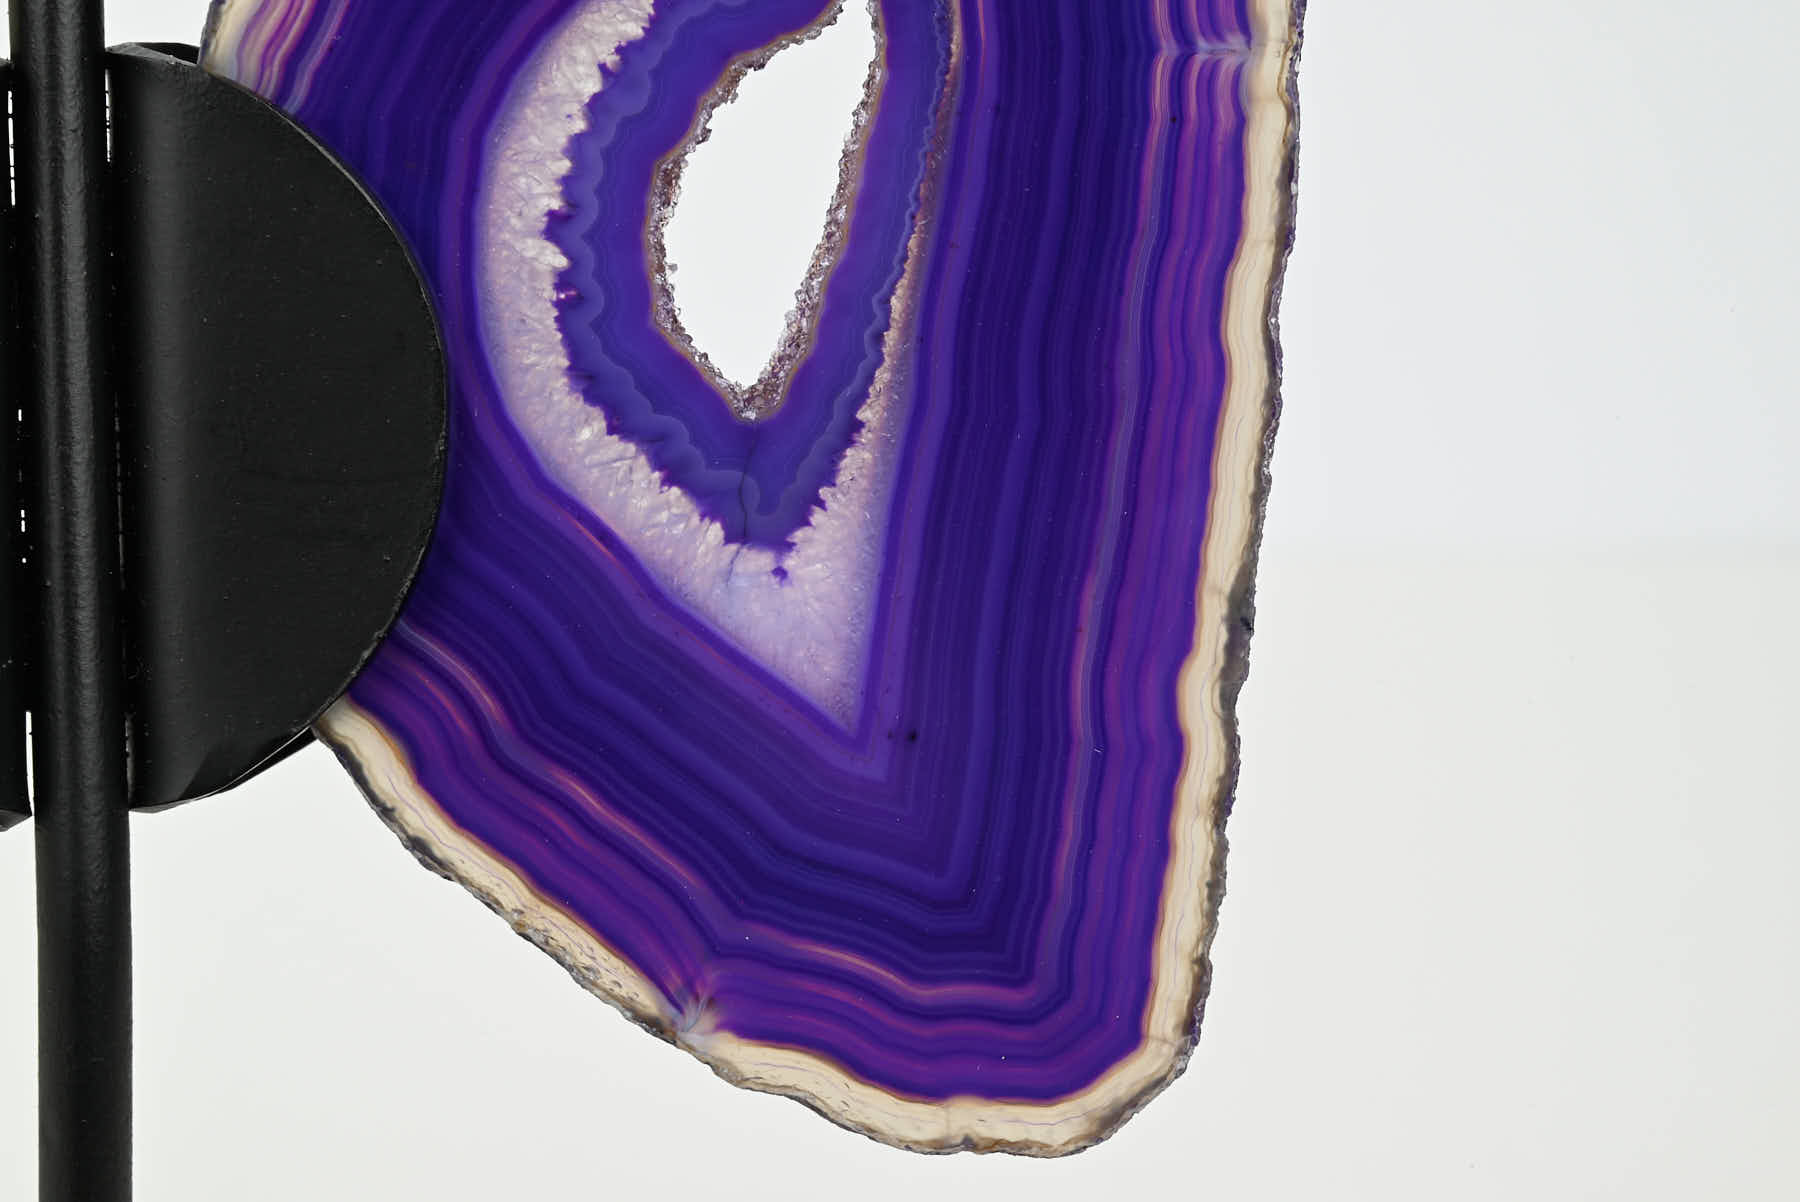 Purple Agate Butterfly on Stand - 0.41kg and 19cm Tall - #BUPURP-10009